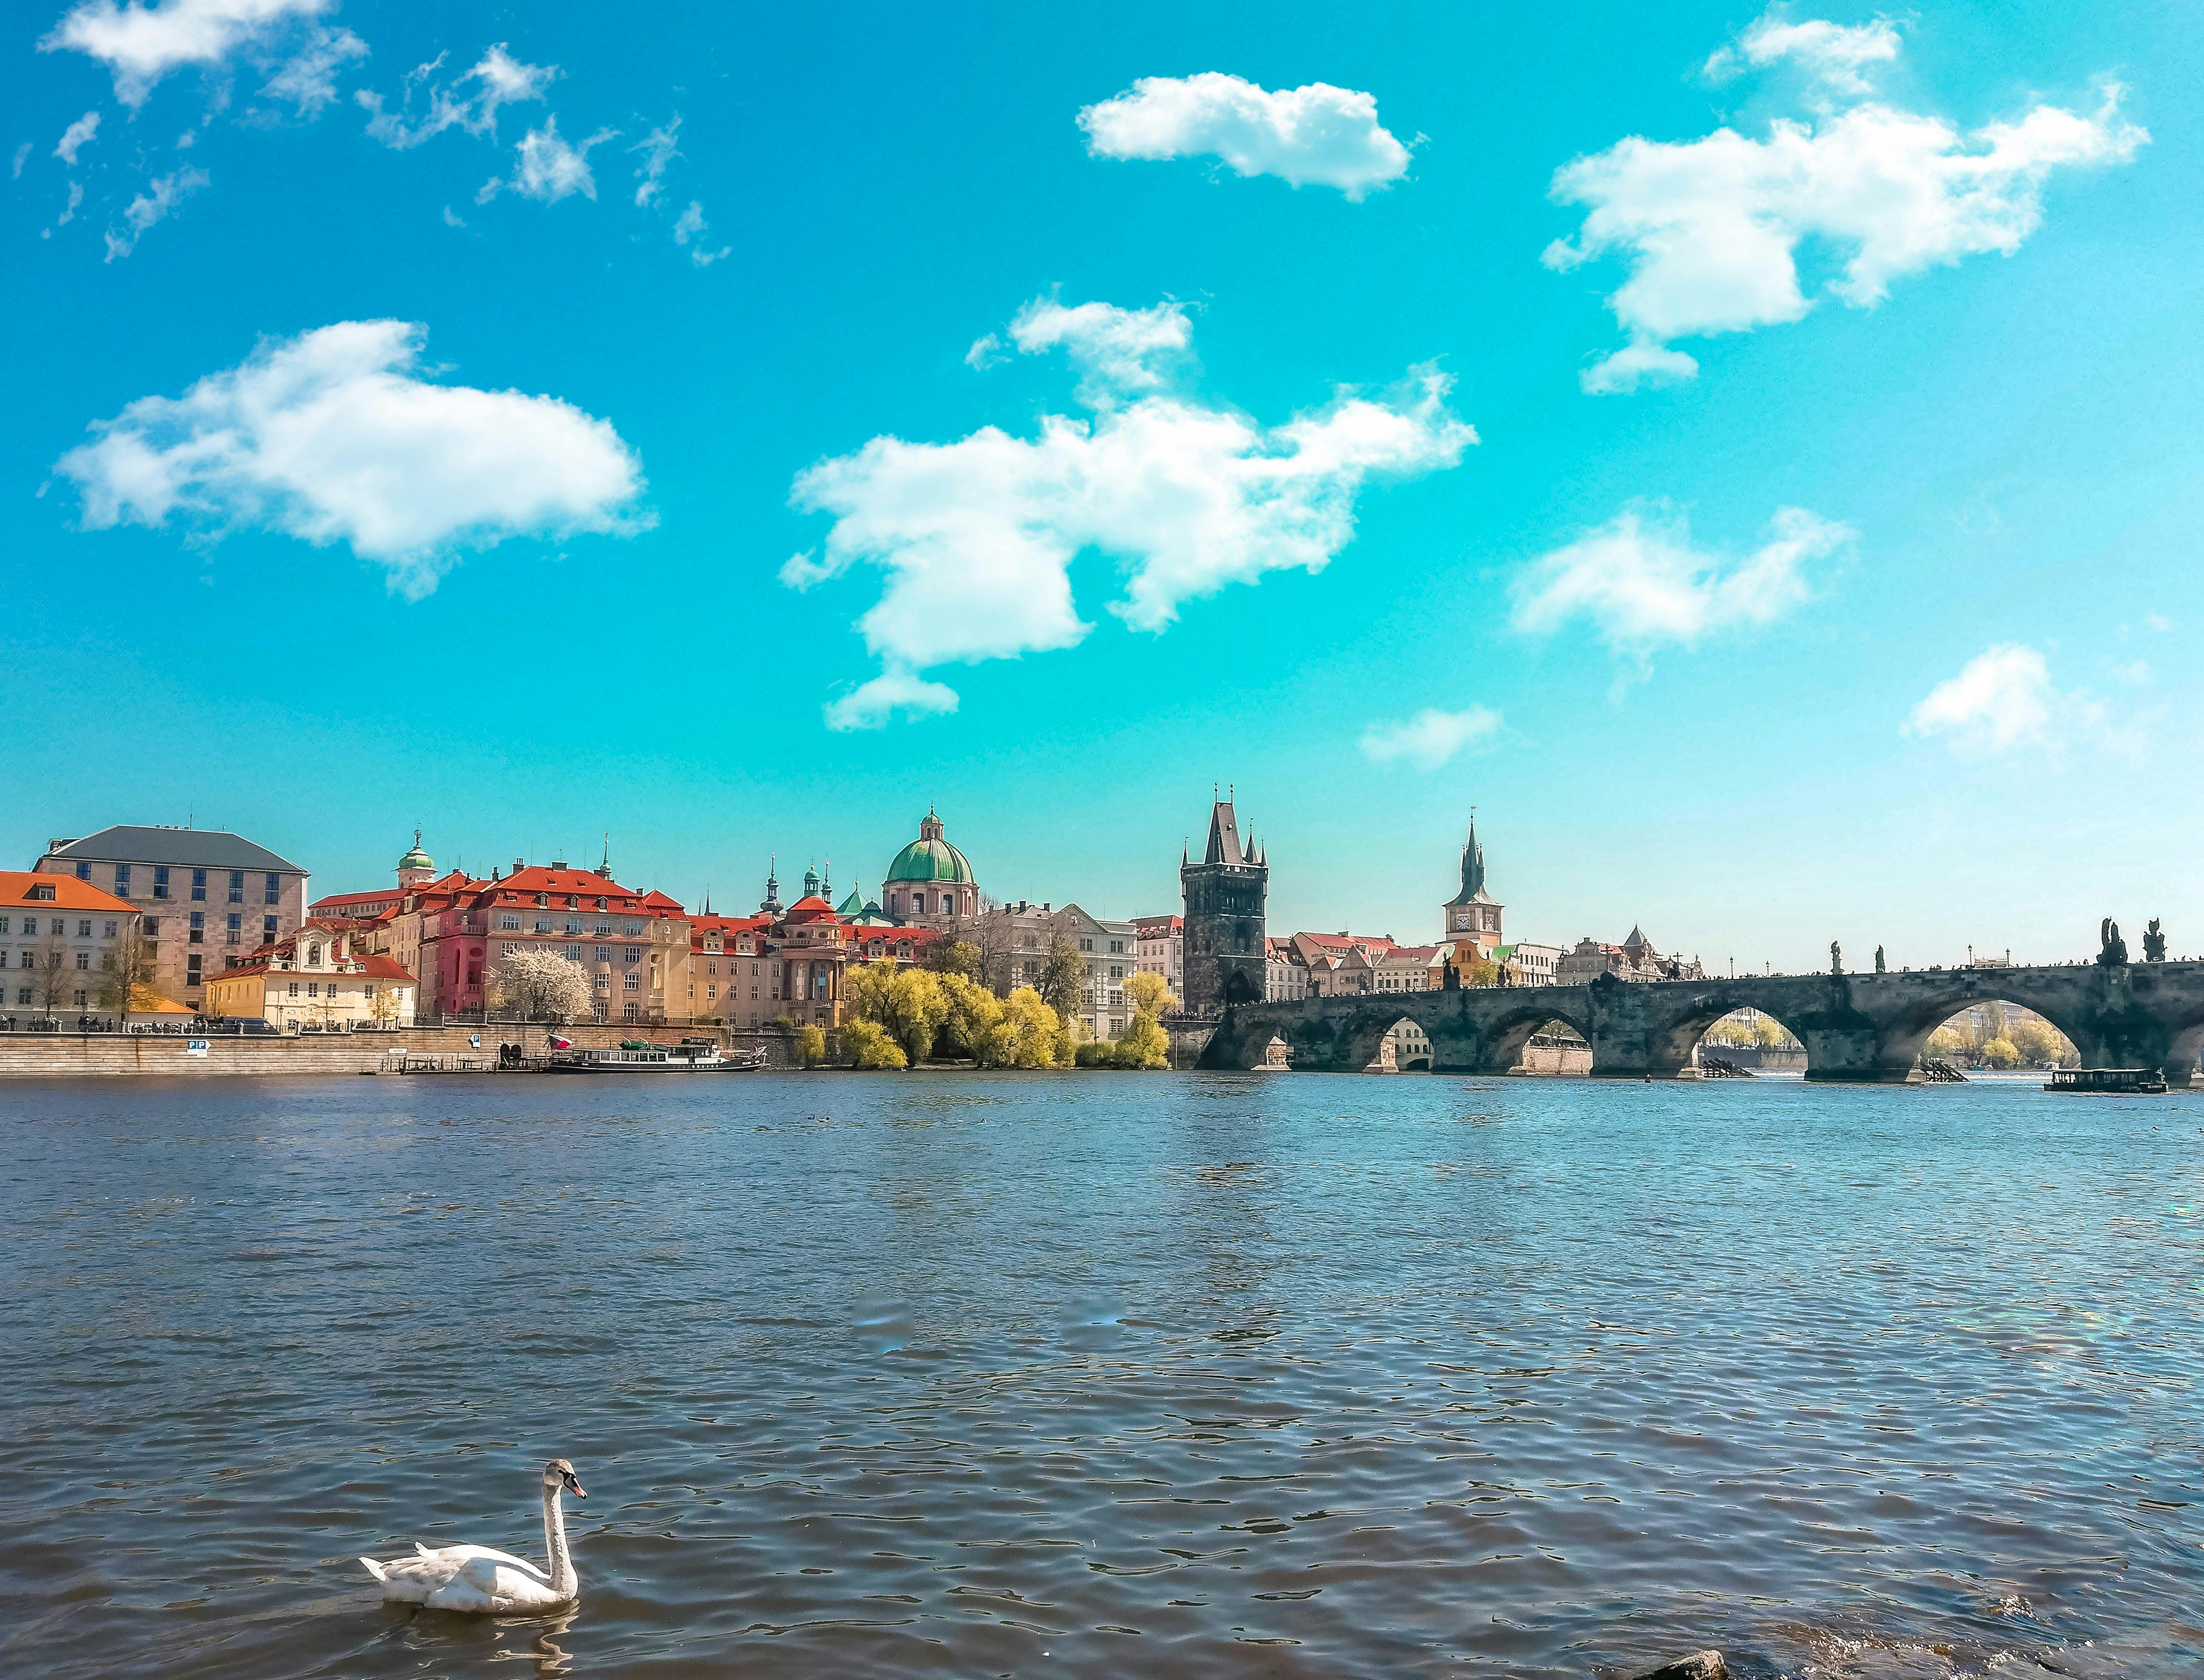 90-minute walking tour of Prague with a local